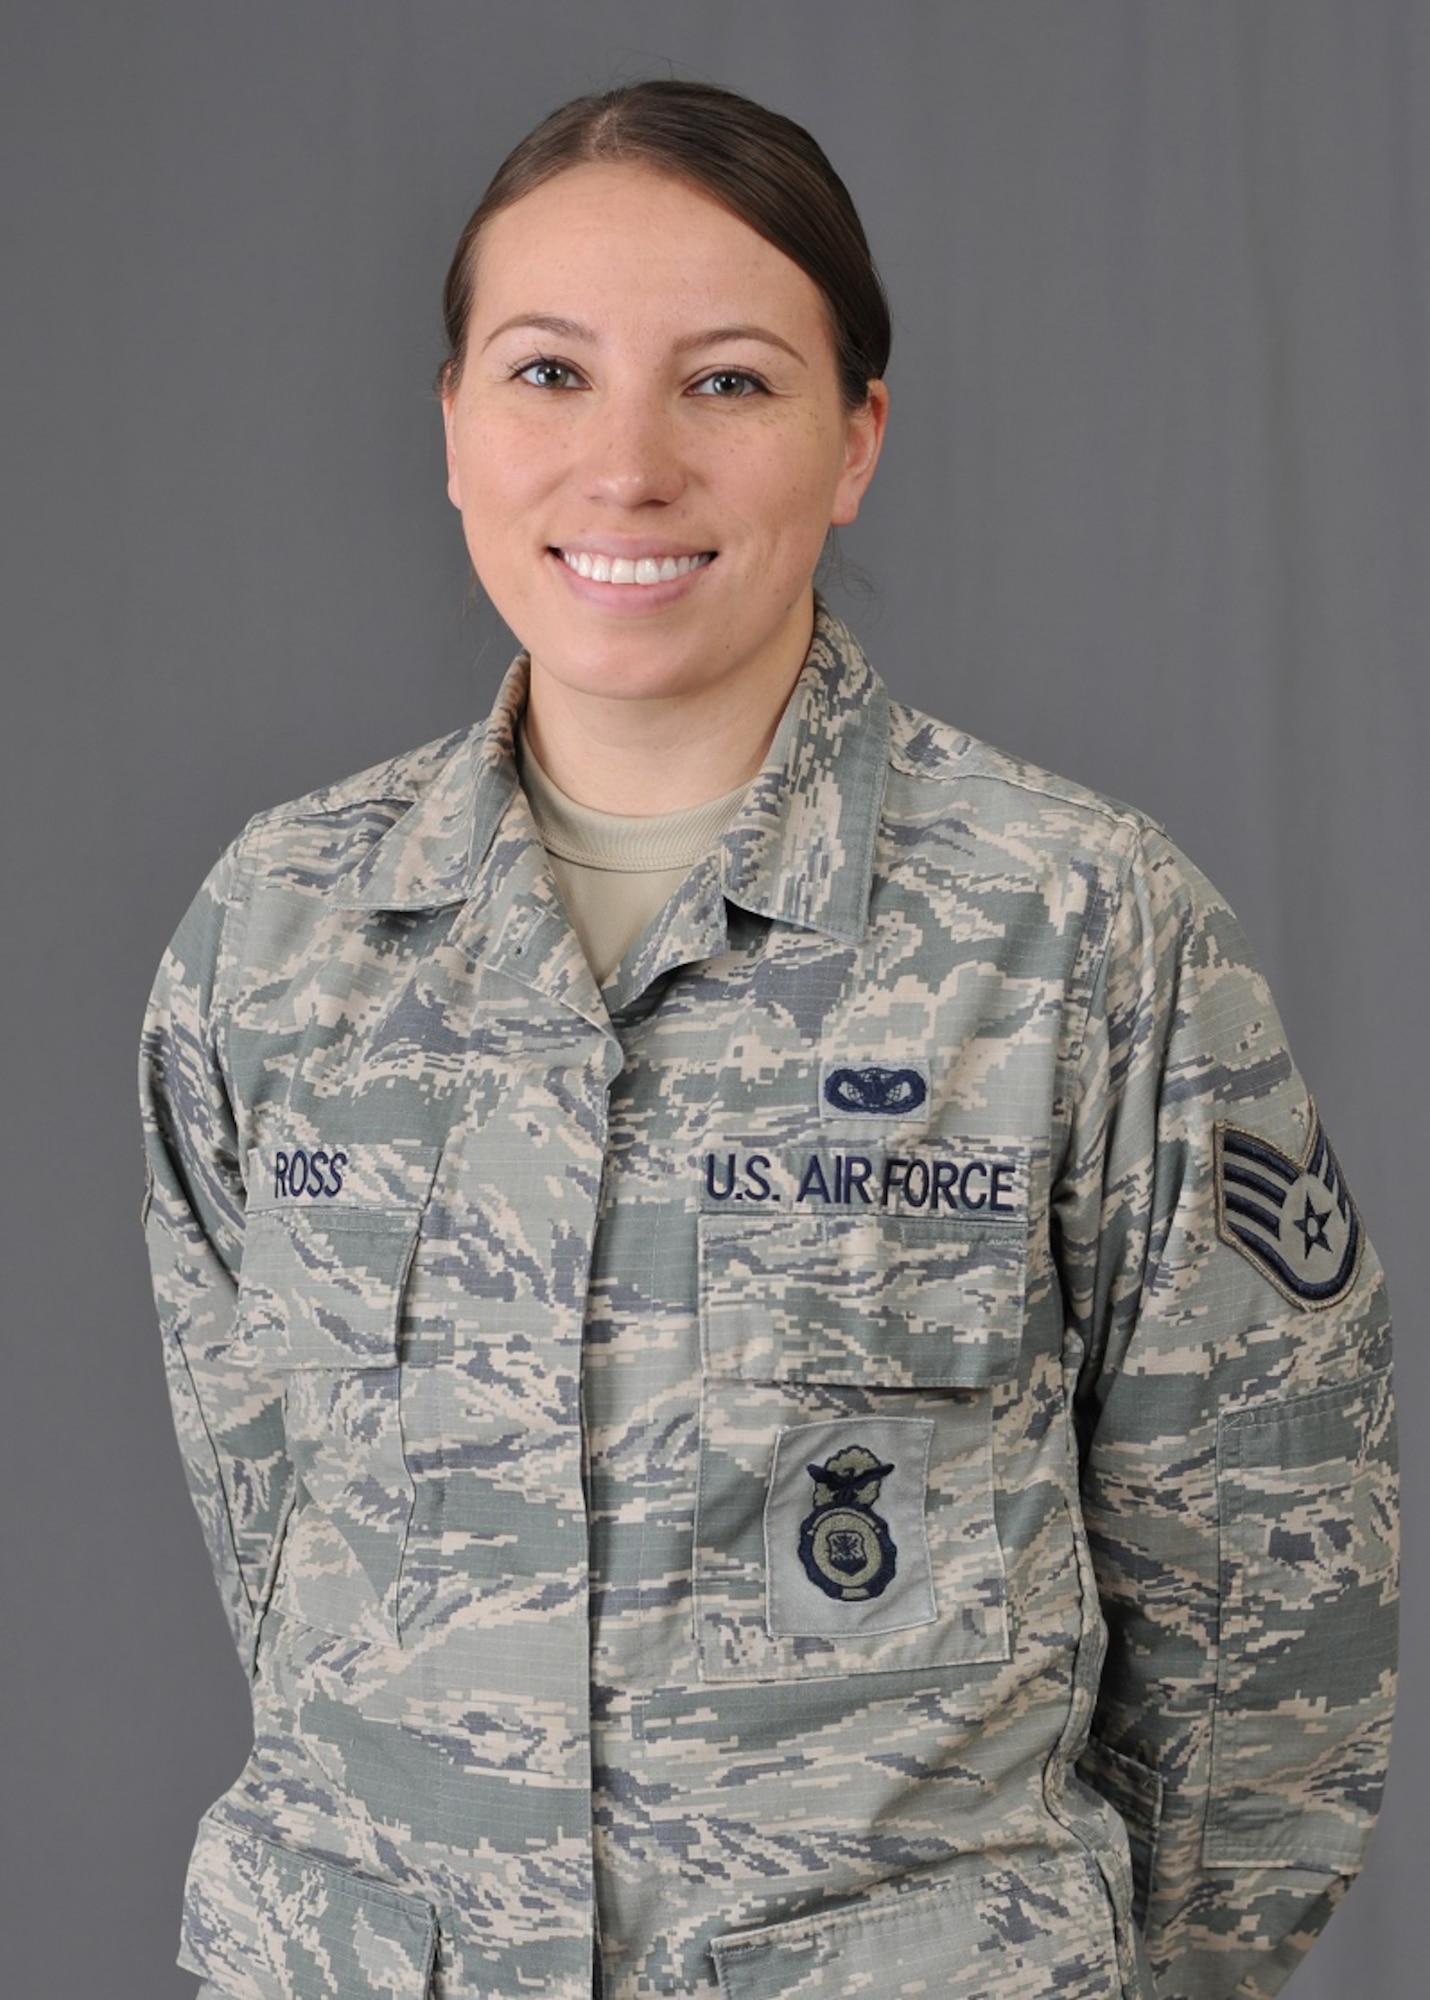 U.S. Air National Guard Staff Sgt. Trisha Ross, a member of the Ho-Chunk/Winnebago Tribe of Nebraska, is assigned to the Security Forces Squadron with the Iowa National Guard's 185th Air Refueling Wing in Sioux City, Iowa. Ross received an award from the Society for American Indian Government Employees for going above and beyond in her duties while promoting Native American culture. (U.S. Air National Guard photo by Staff Sgt. Daniel Ter Haar)